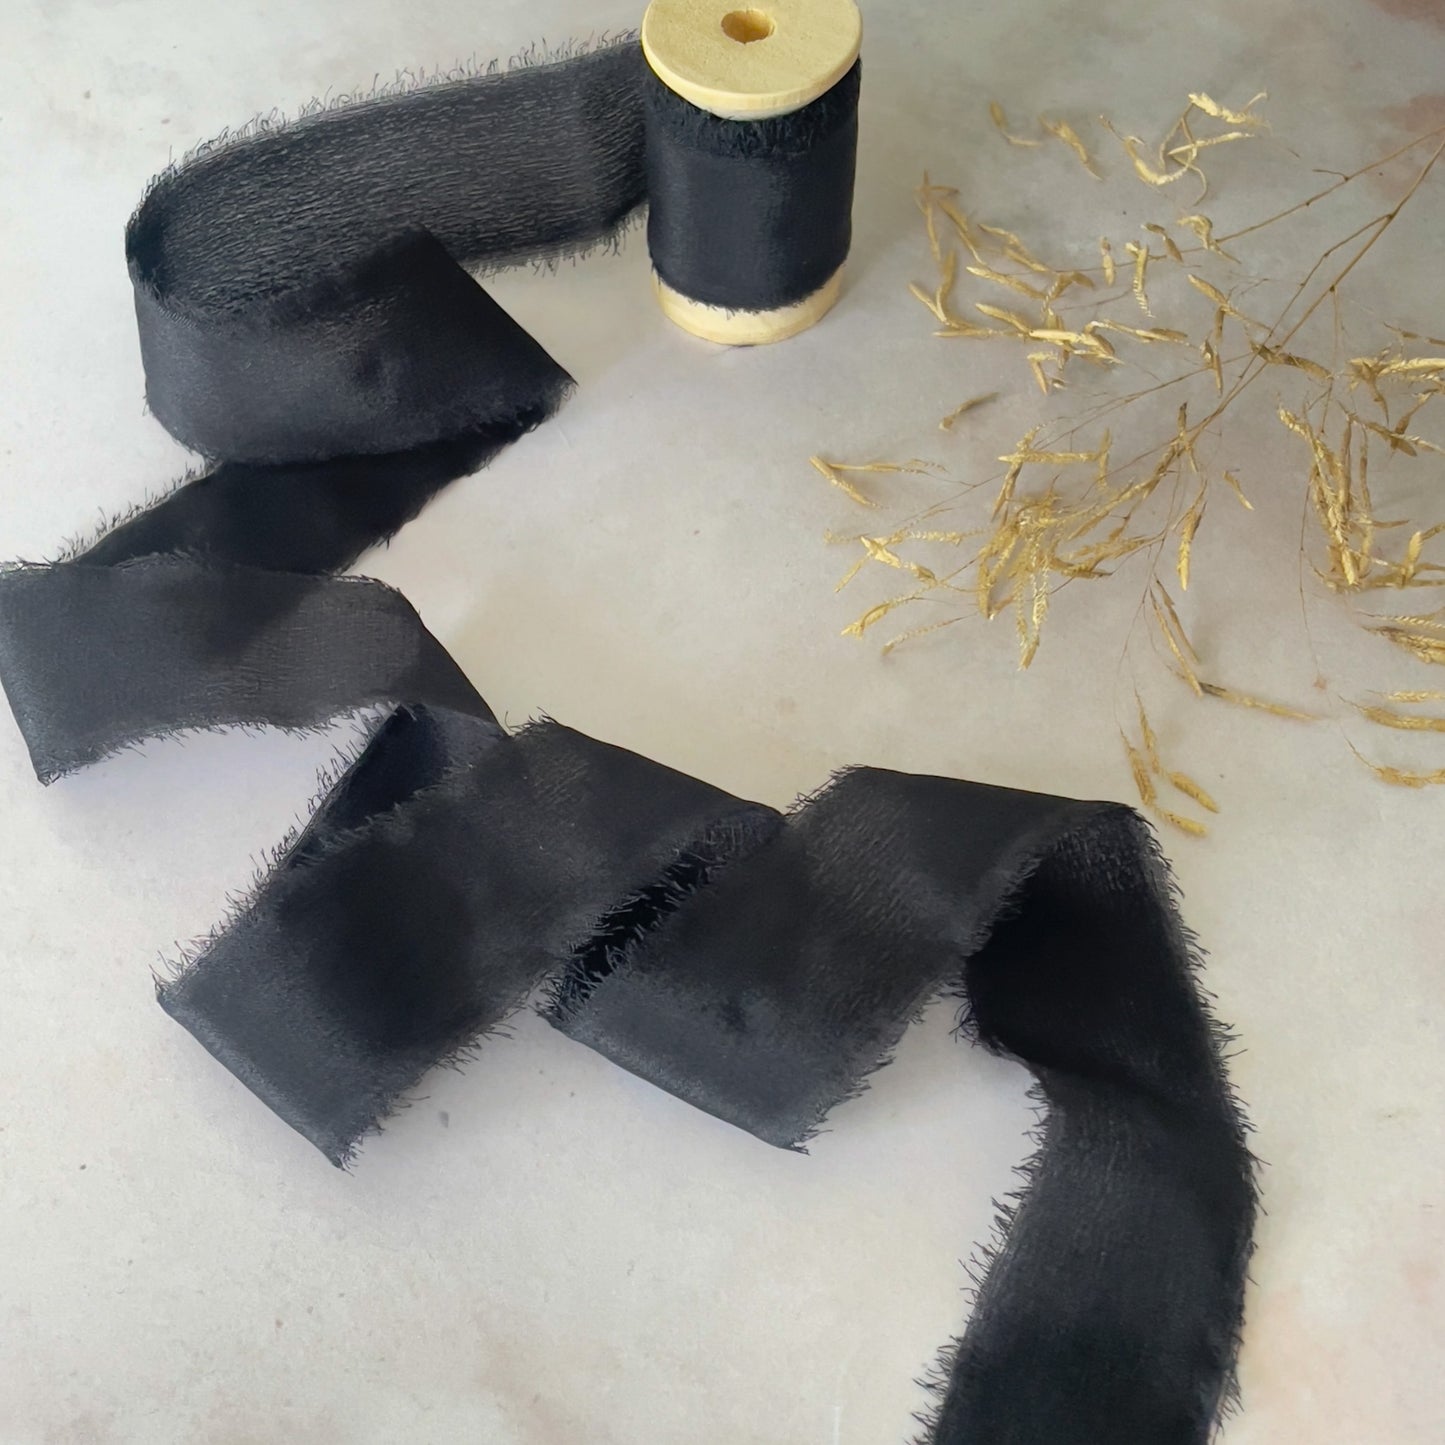 Black Silk Ribbon for crafts.  High quality habotai ribbon with a raw edge.  Decorative ribbon sold on a wooden reel.  By The Natural Paper Company